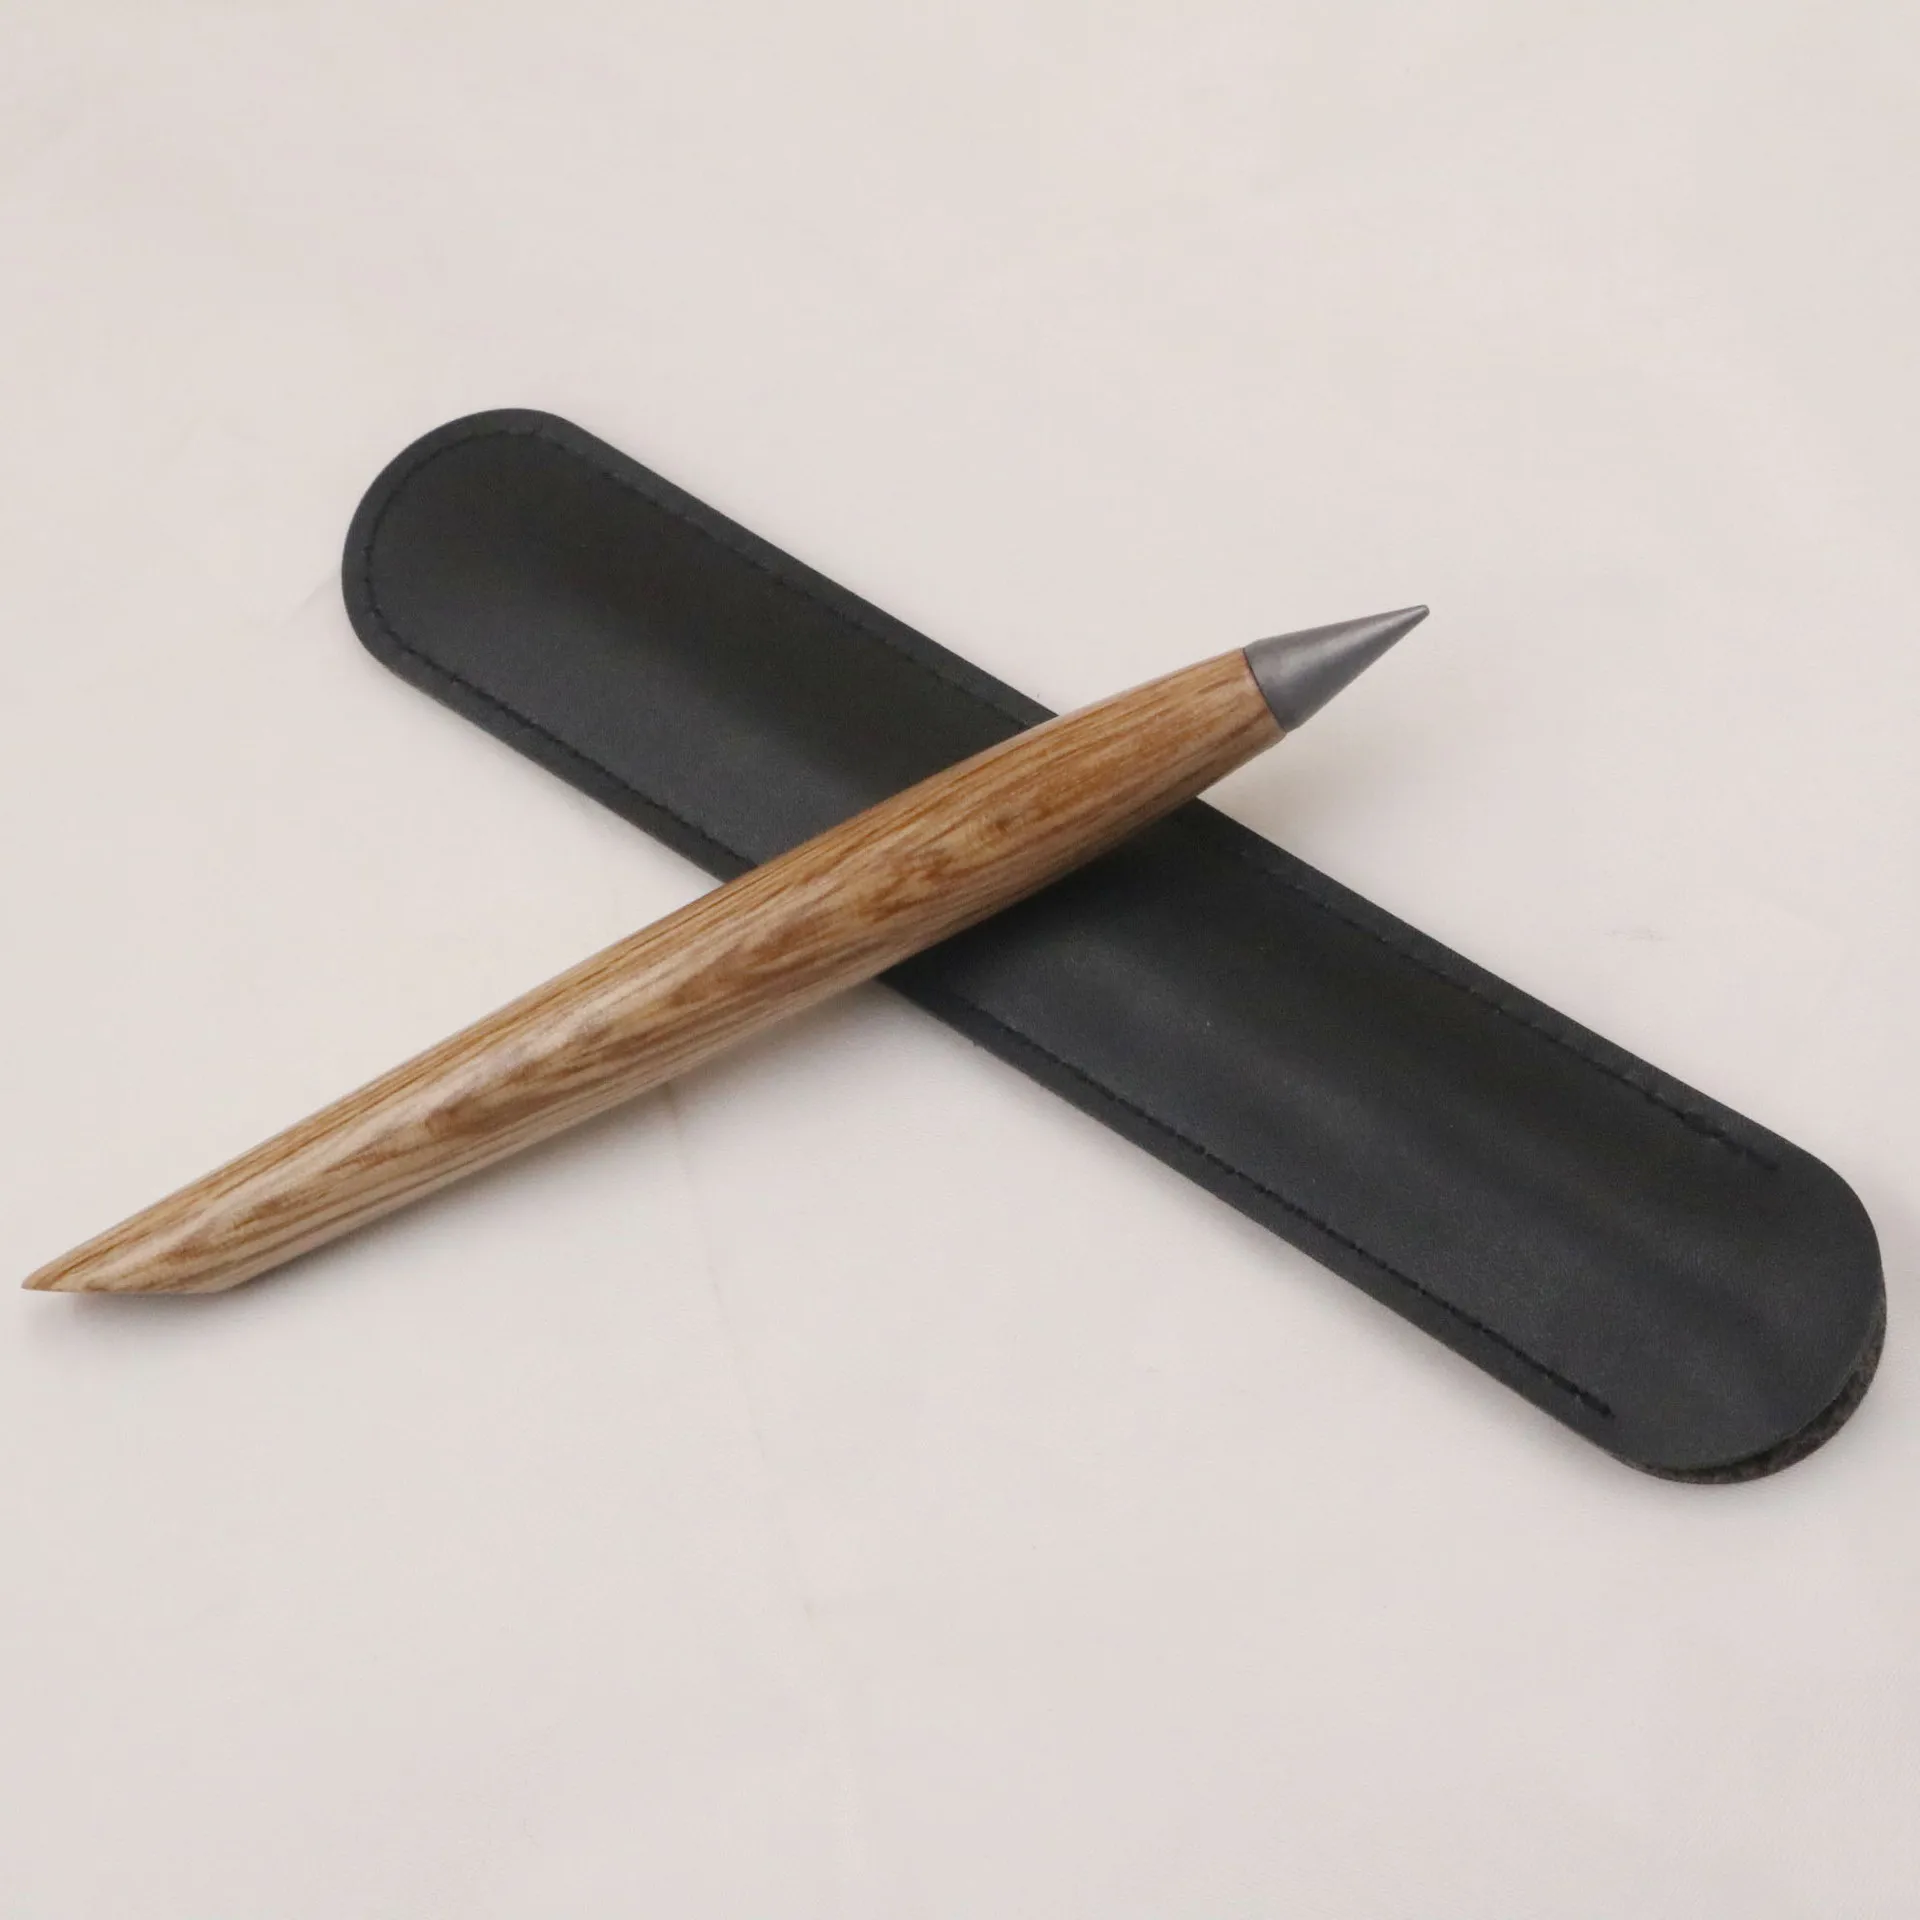 high quality wooden inkless pencil eternal